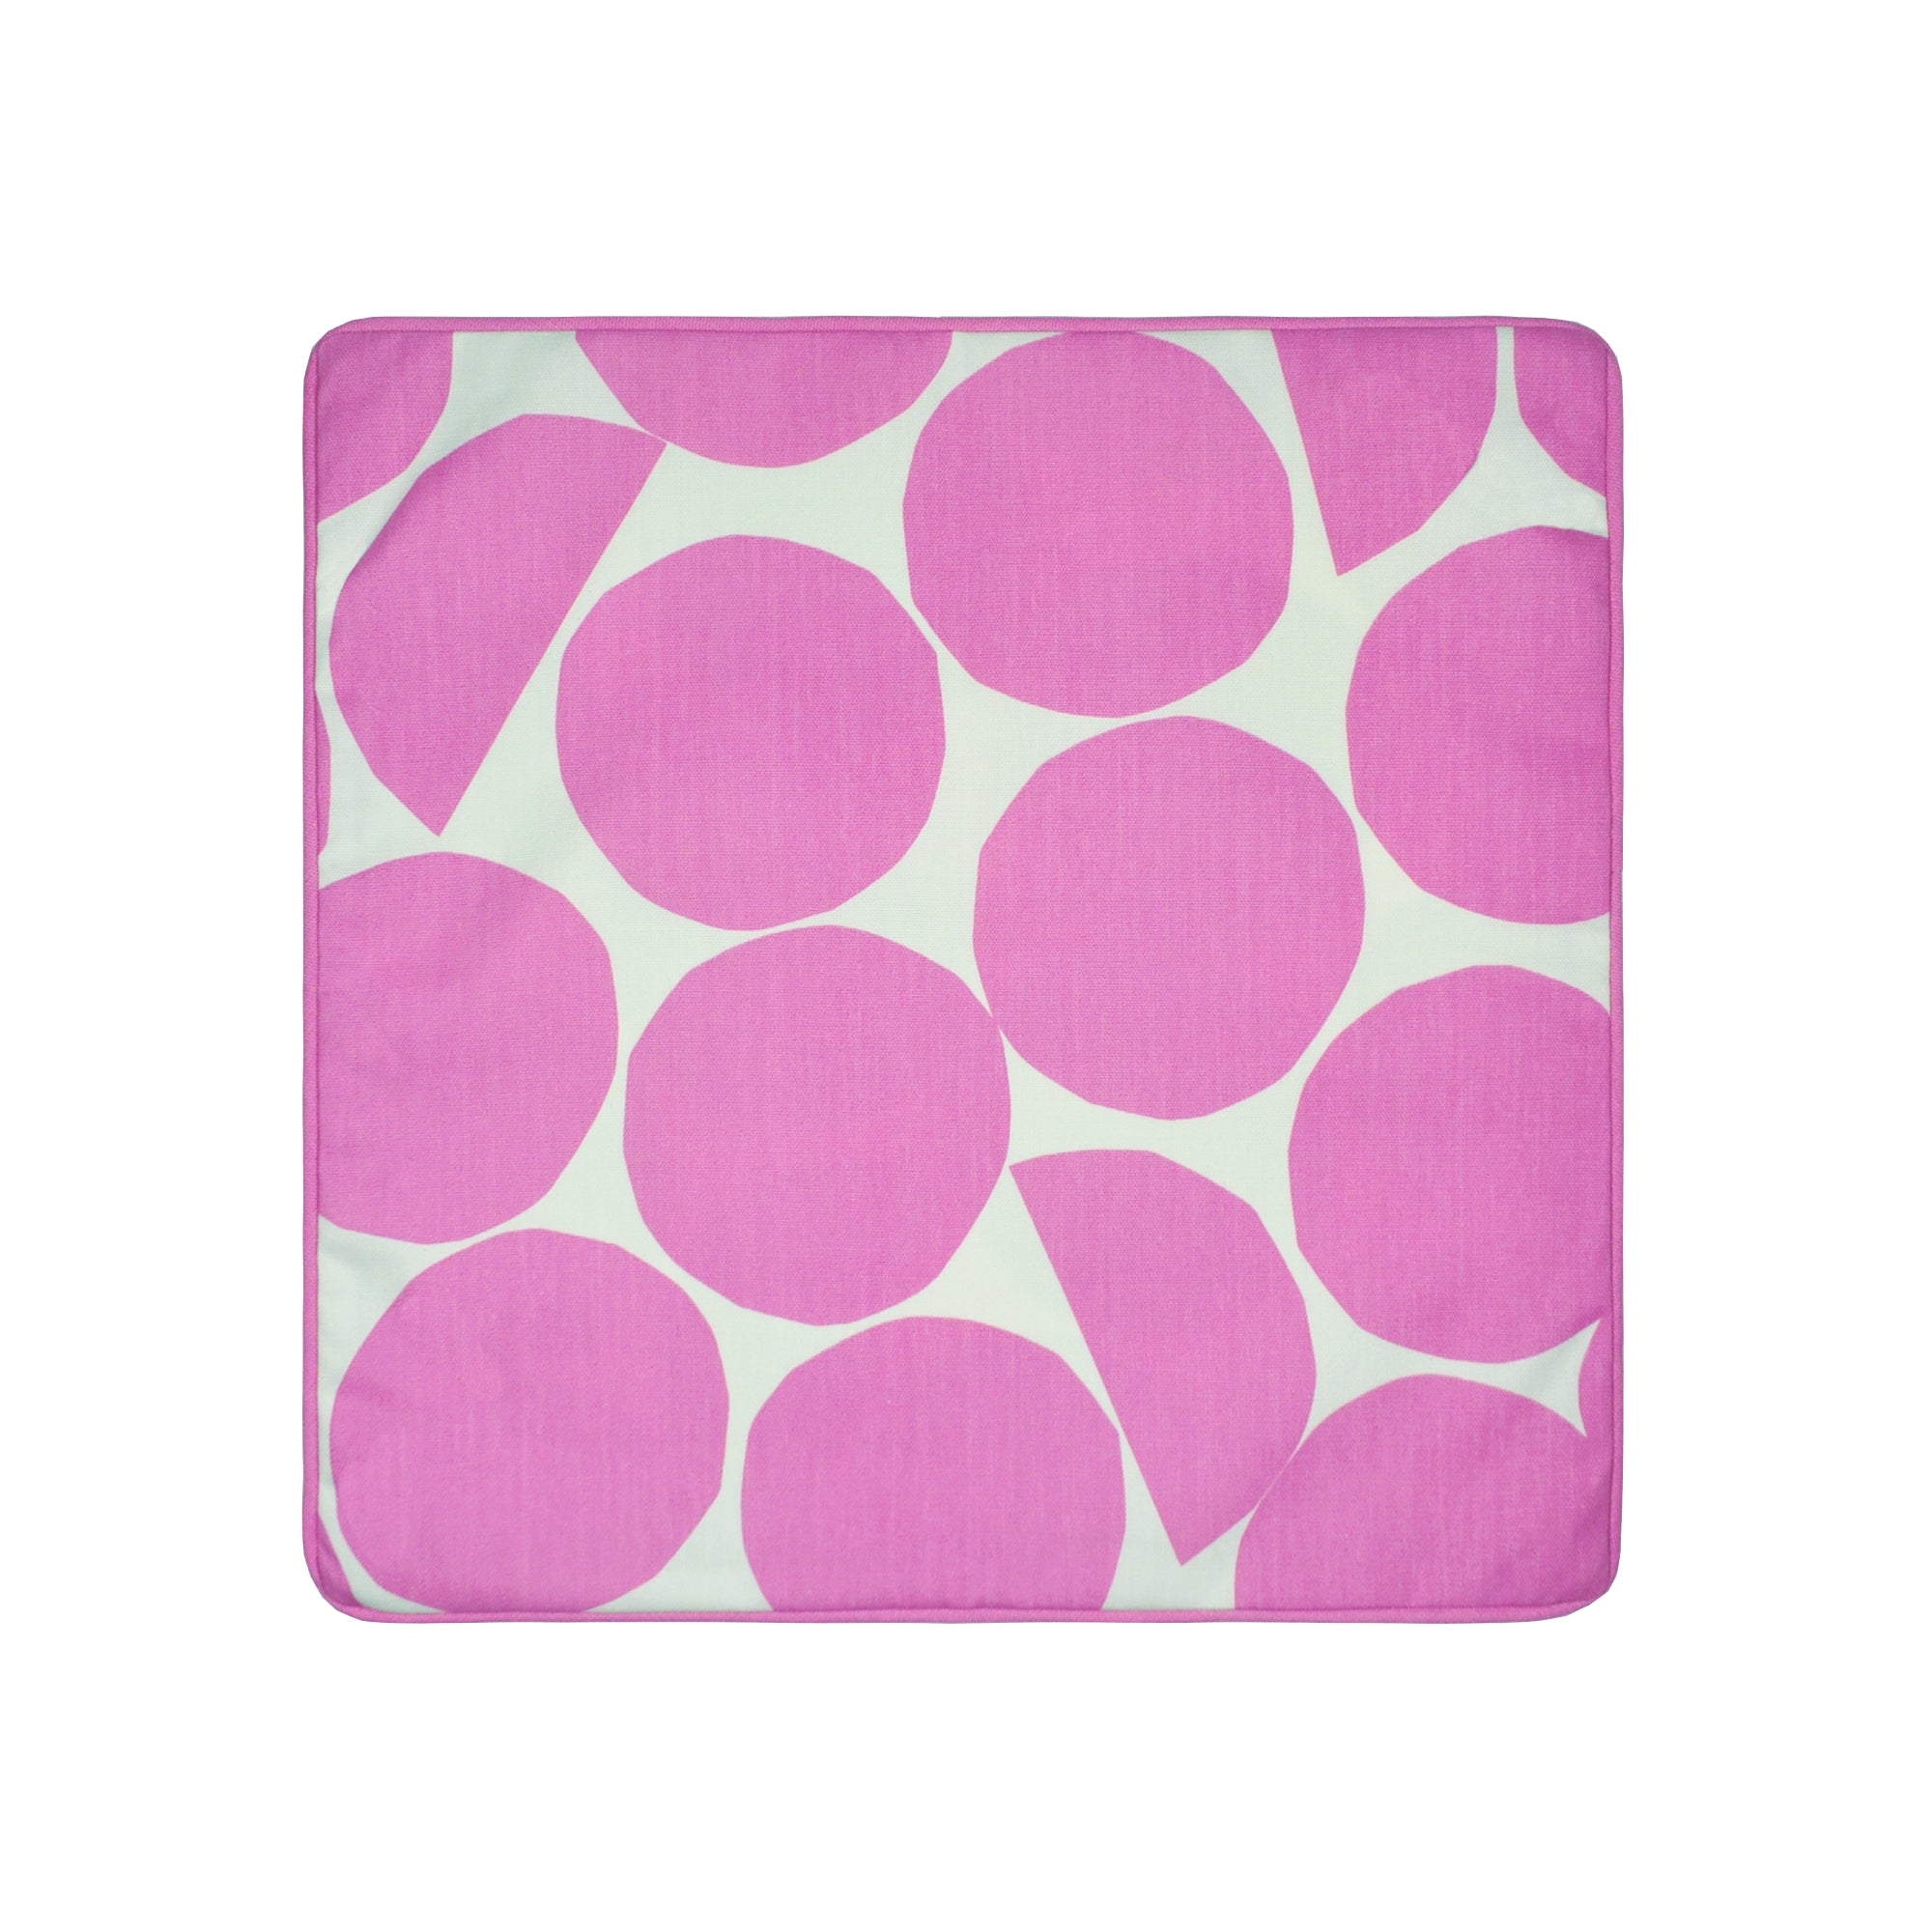 Filled Outdoor Cushion Ingo by Fusion in Pink/Green